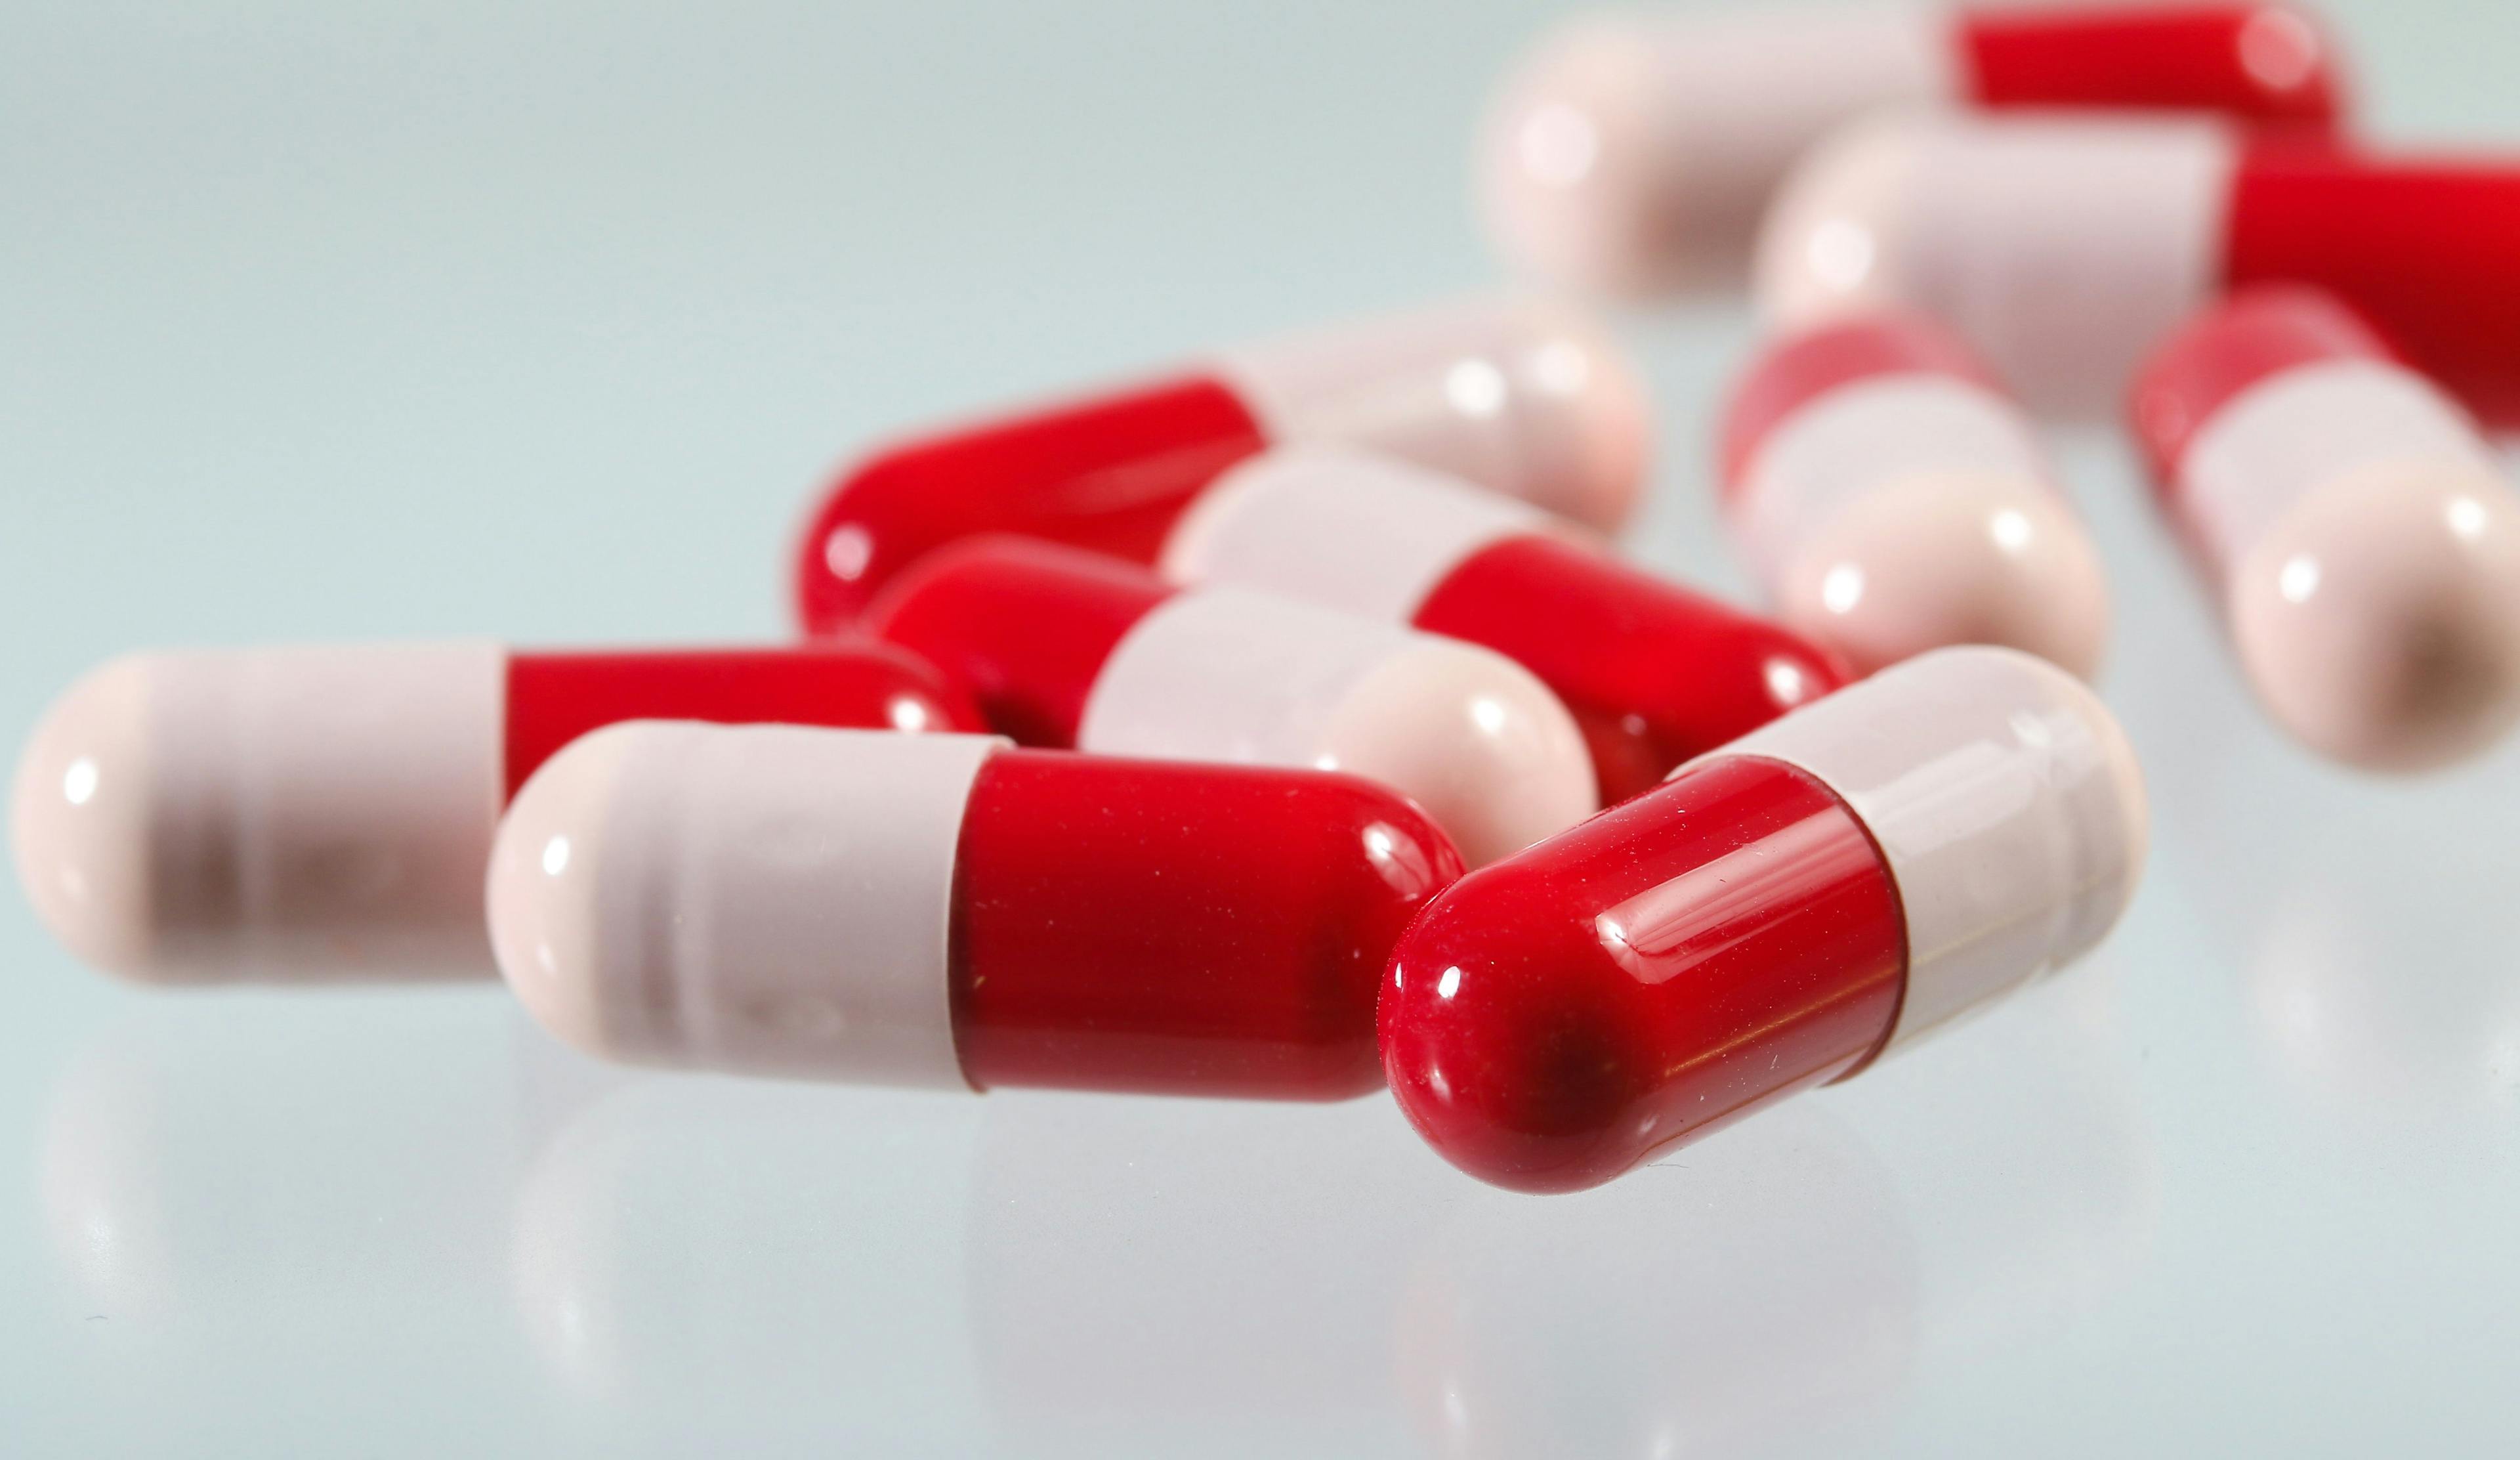 Physician stress may be linked to inappropriate antibiotic prescribing